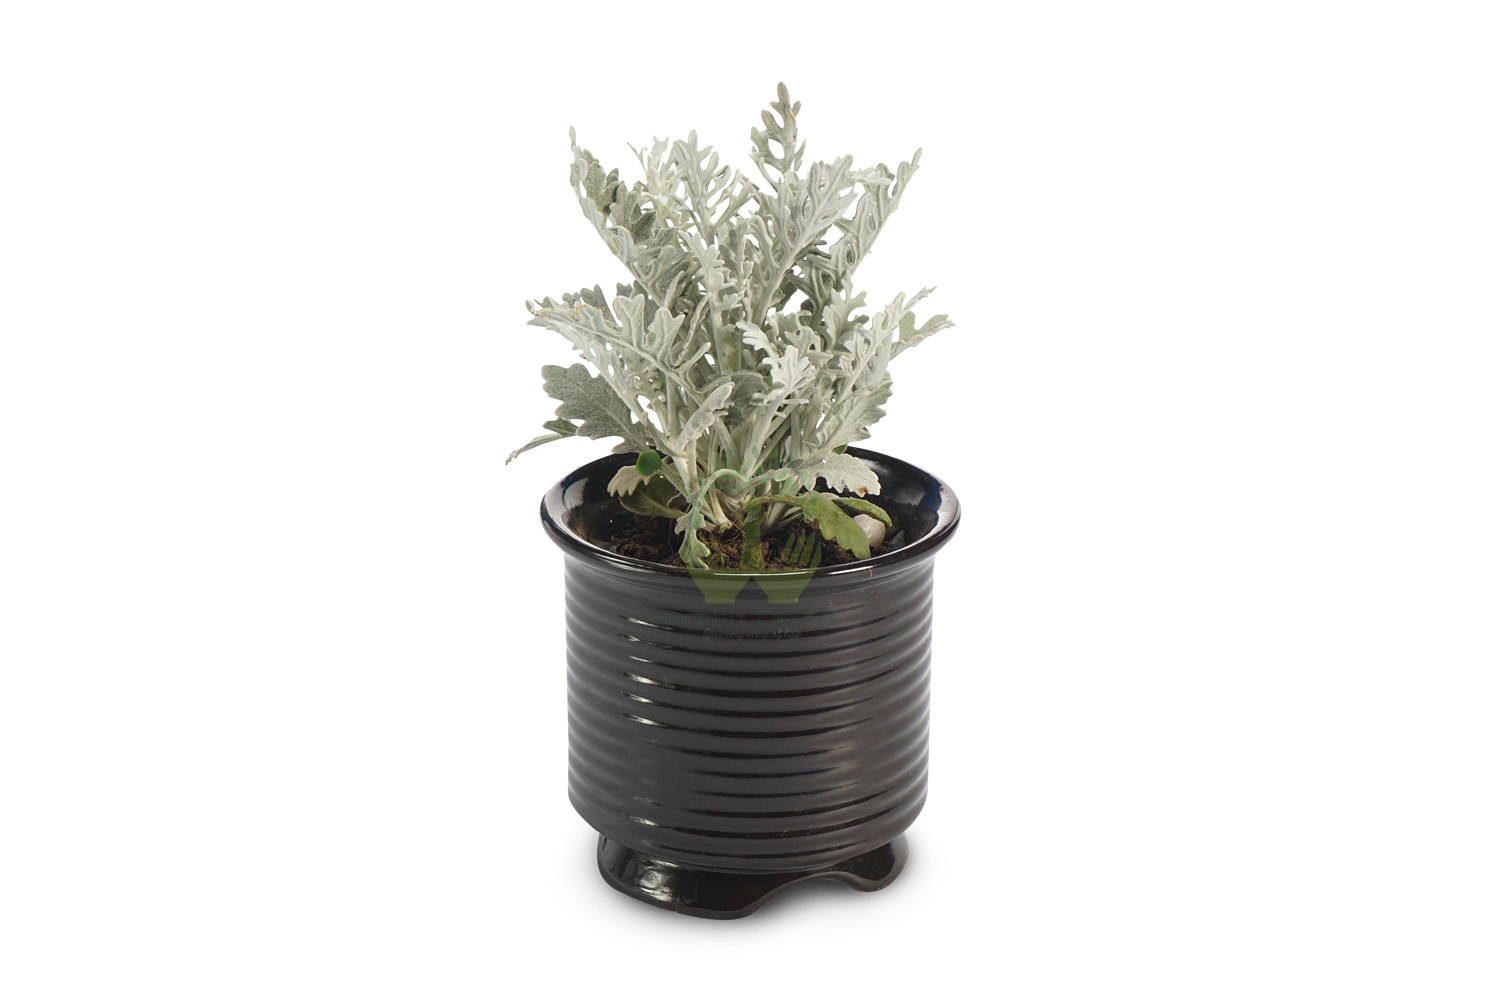 Buy Silver Dust Plants , White Pots and seeds in Delhi NCR by the best online nursery shop Greendecor.